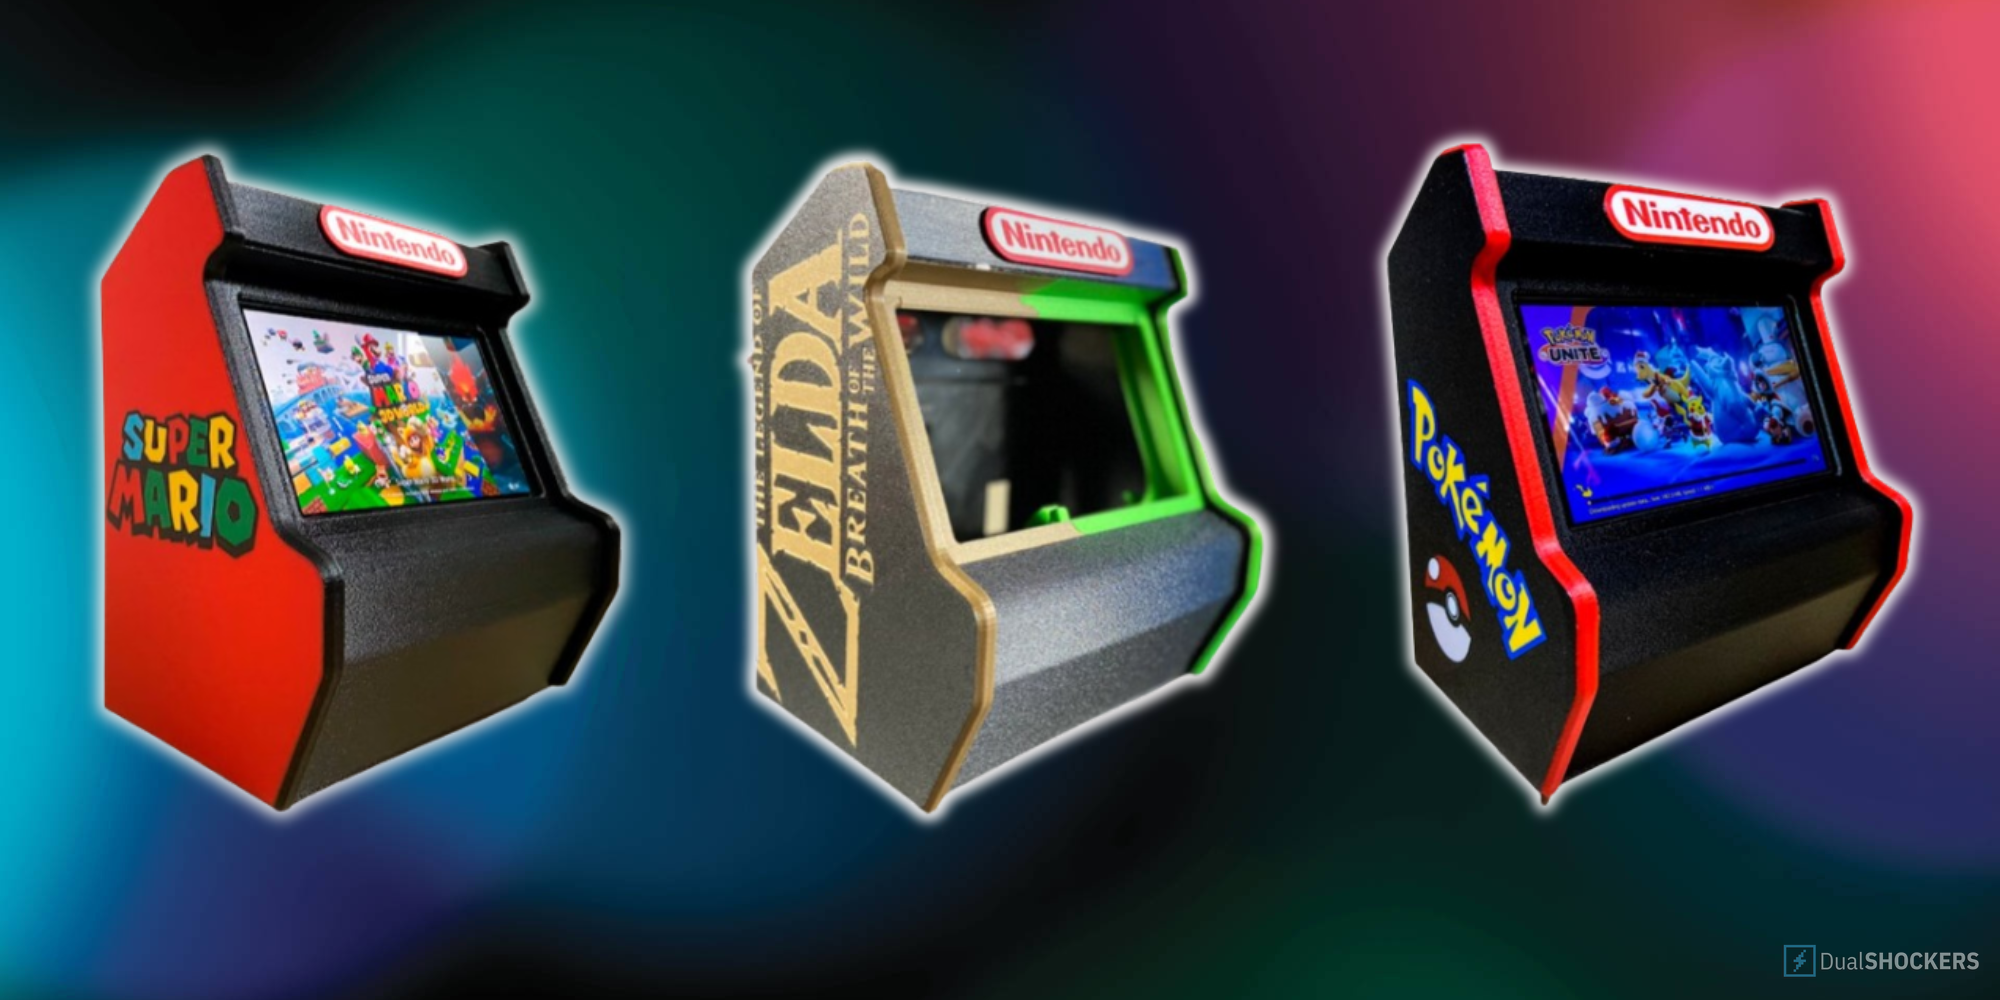 Turn Your Nintendo Switch Into These Amazing Arcade Cabinets